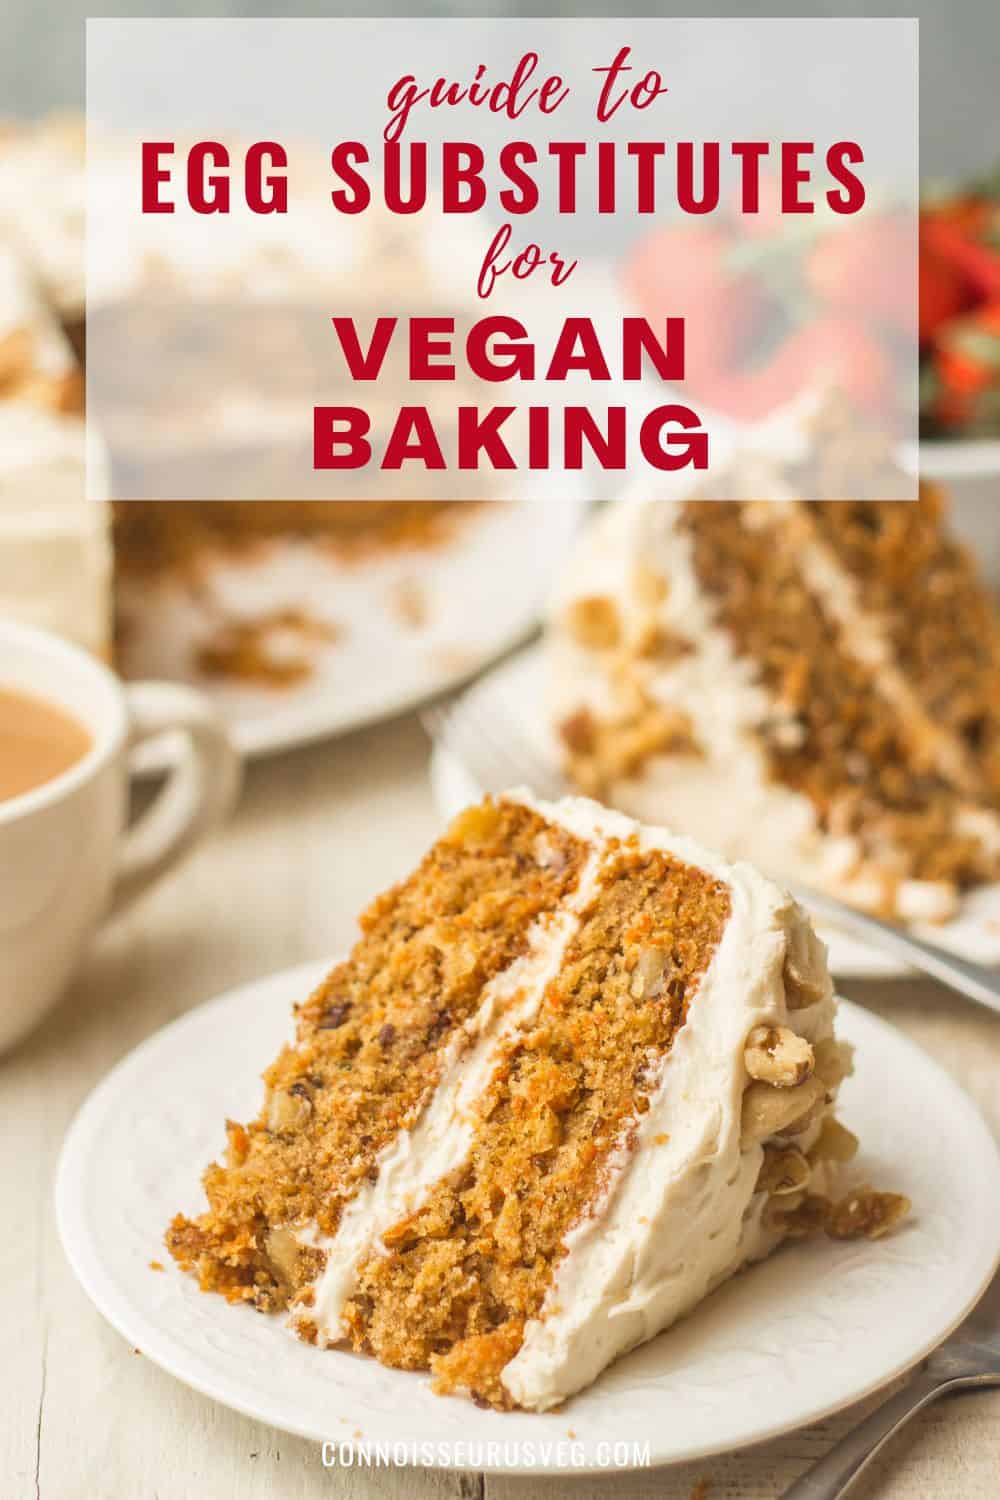 Slice of vegan carrot cake on a plate with text overlay reading "guide to egg substitutes for vegan baking."